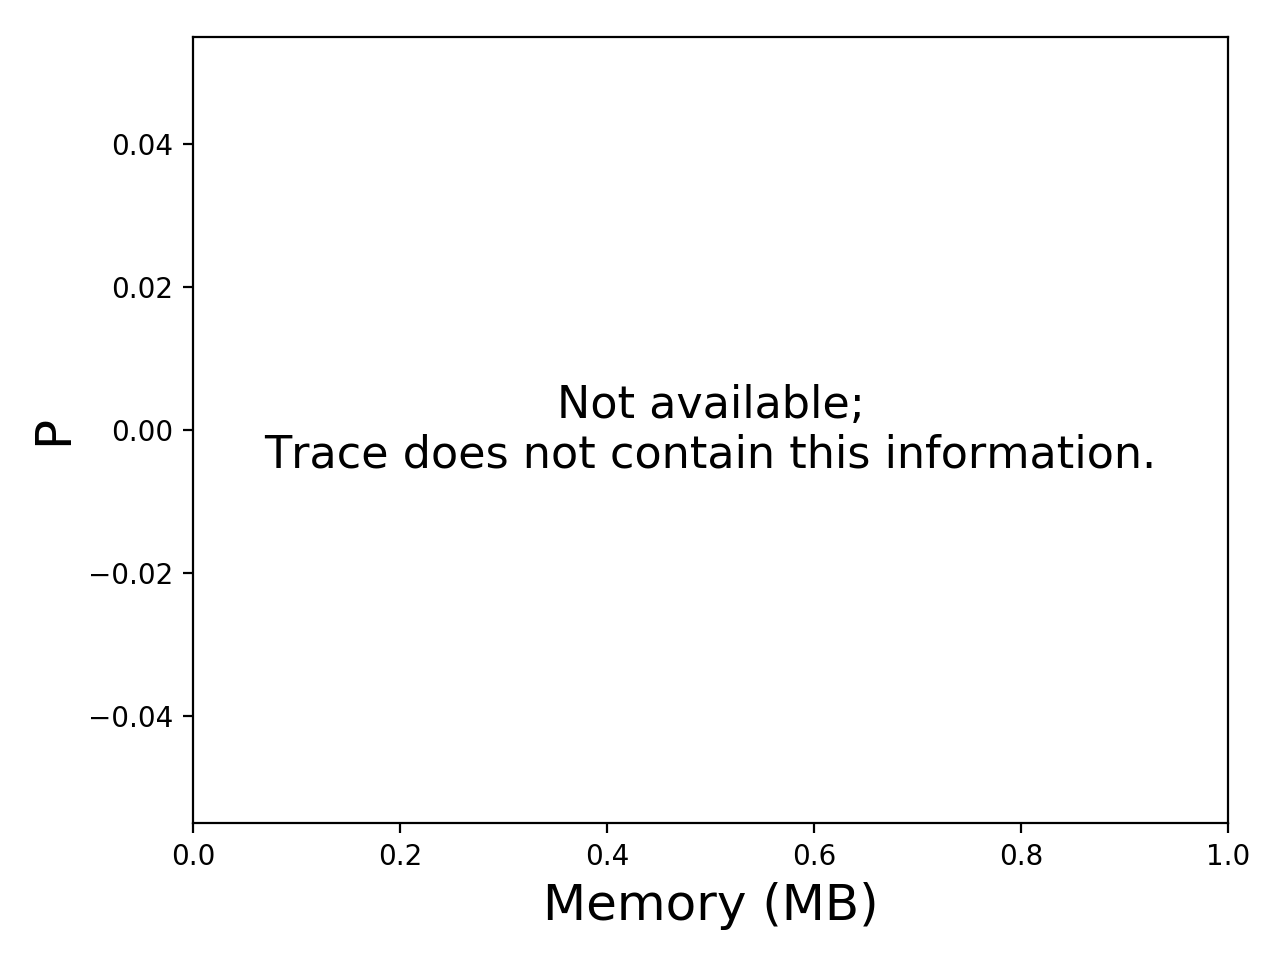 Task memory consumption graph for the workflowhub_montage_ti01-971107n_degree-2-0_osg_schema-0-2_montage-2-0-osg-run007 trace.